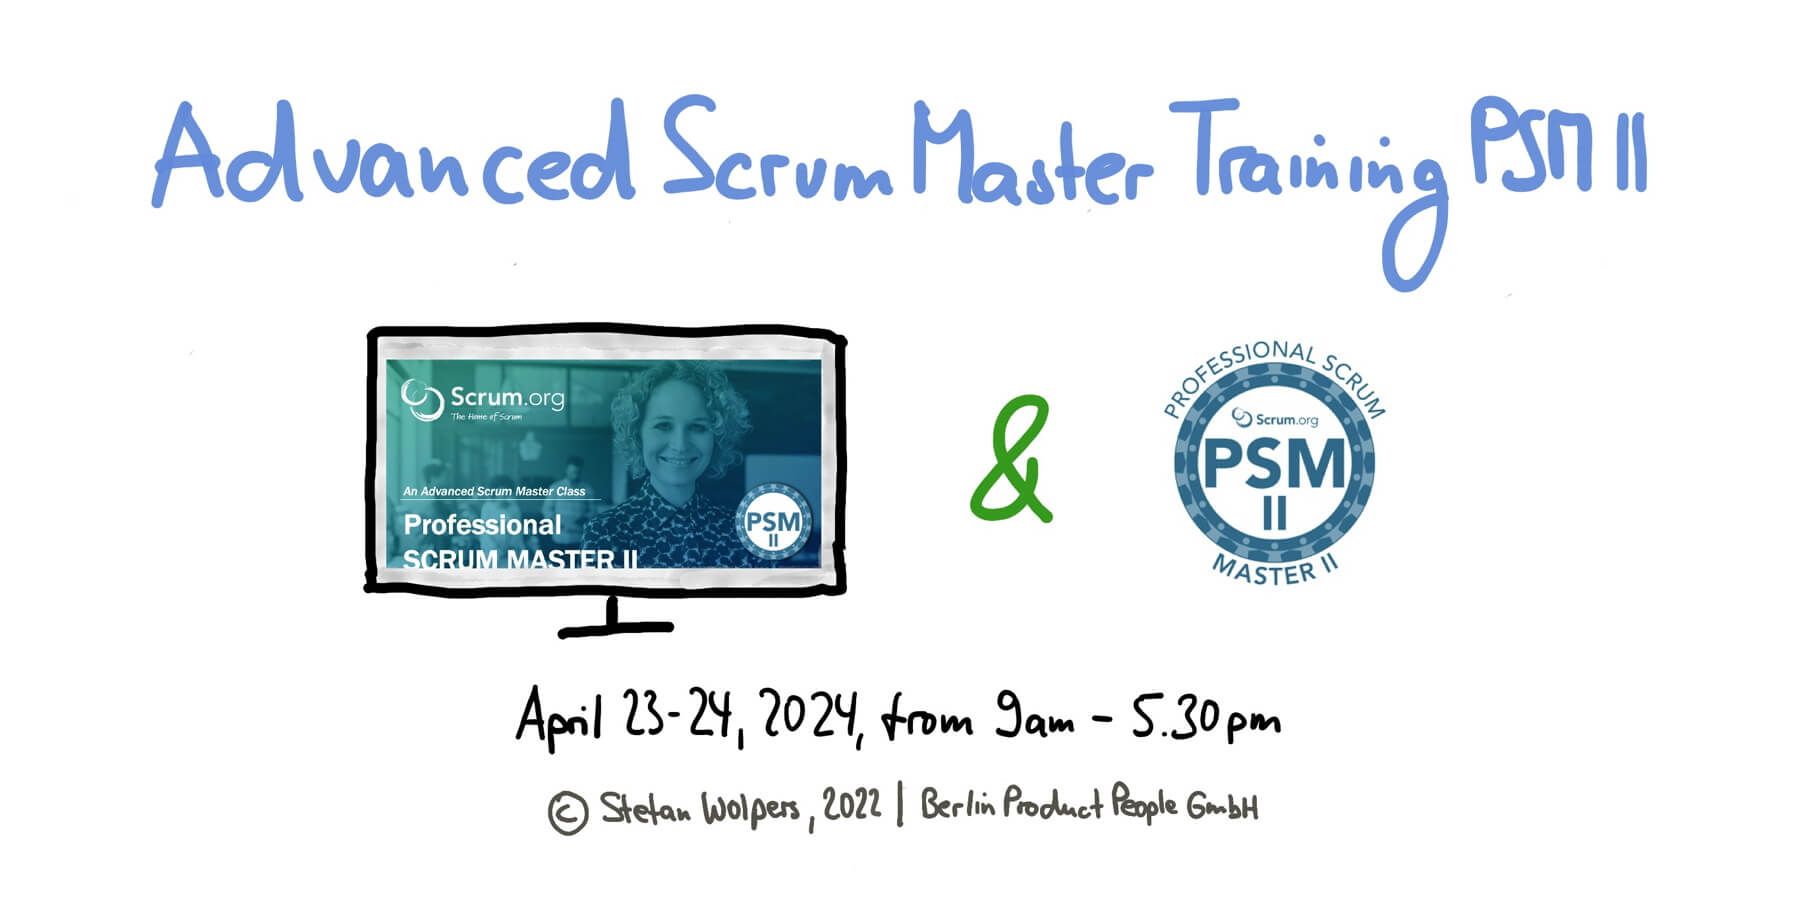 Advanced Professional Scrum Master Online Training w/ PSM II Certificate — April 23-24, 2024 — Berlin-Product-People.com